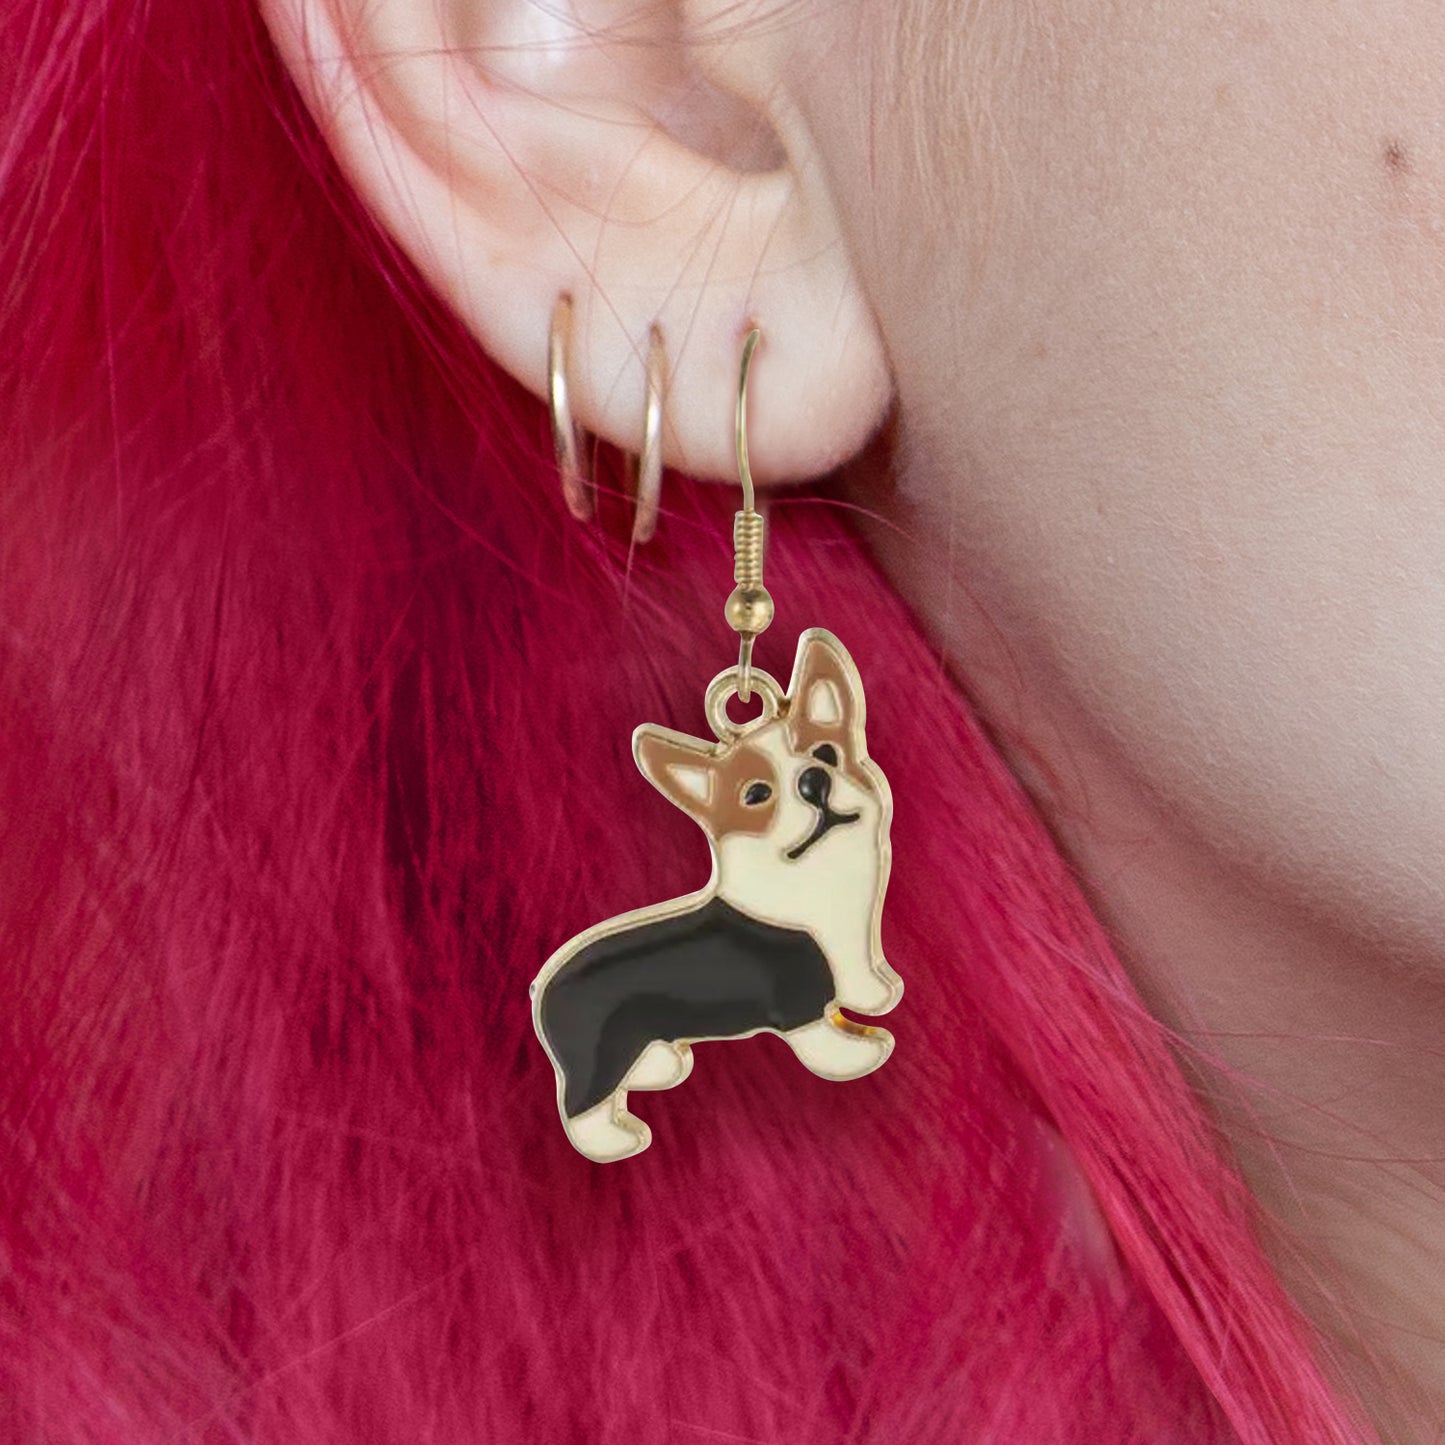 Close up view of a model's ear. An earring shaped like a Welsh Corgi is hanging from her earlobe. Behind the earring is the model's bright pink hair.